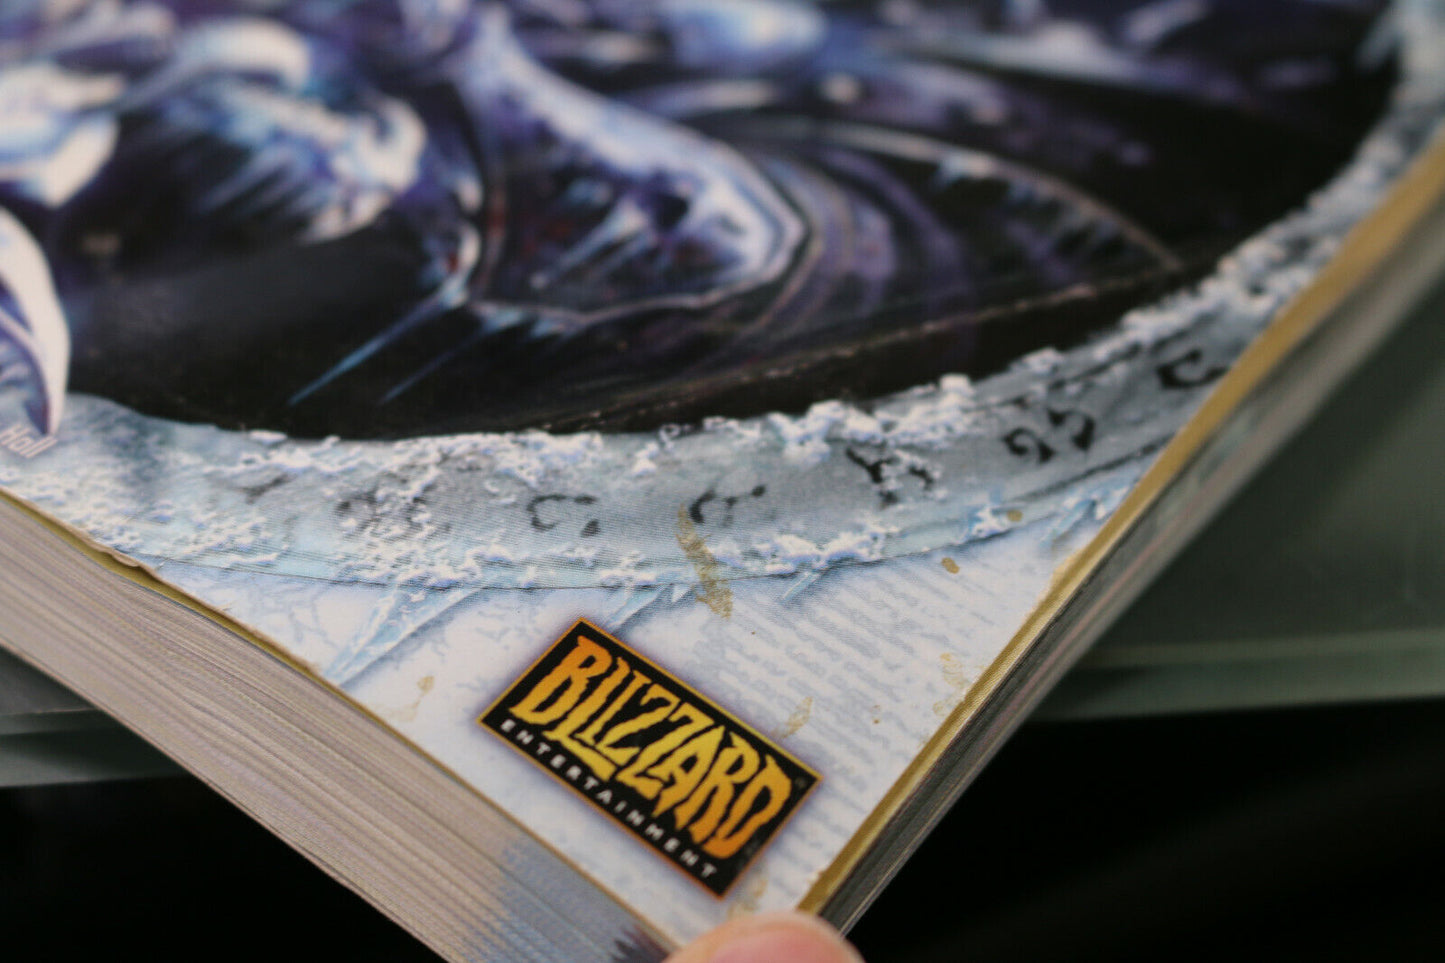 World Of Warcraft Wrath Of The Lich King Official Strategy Guide Book